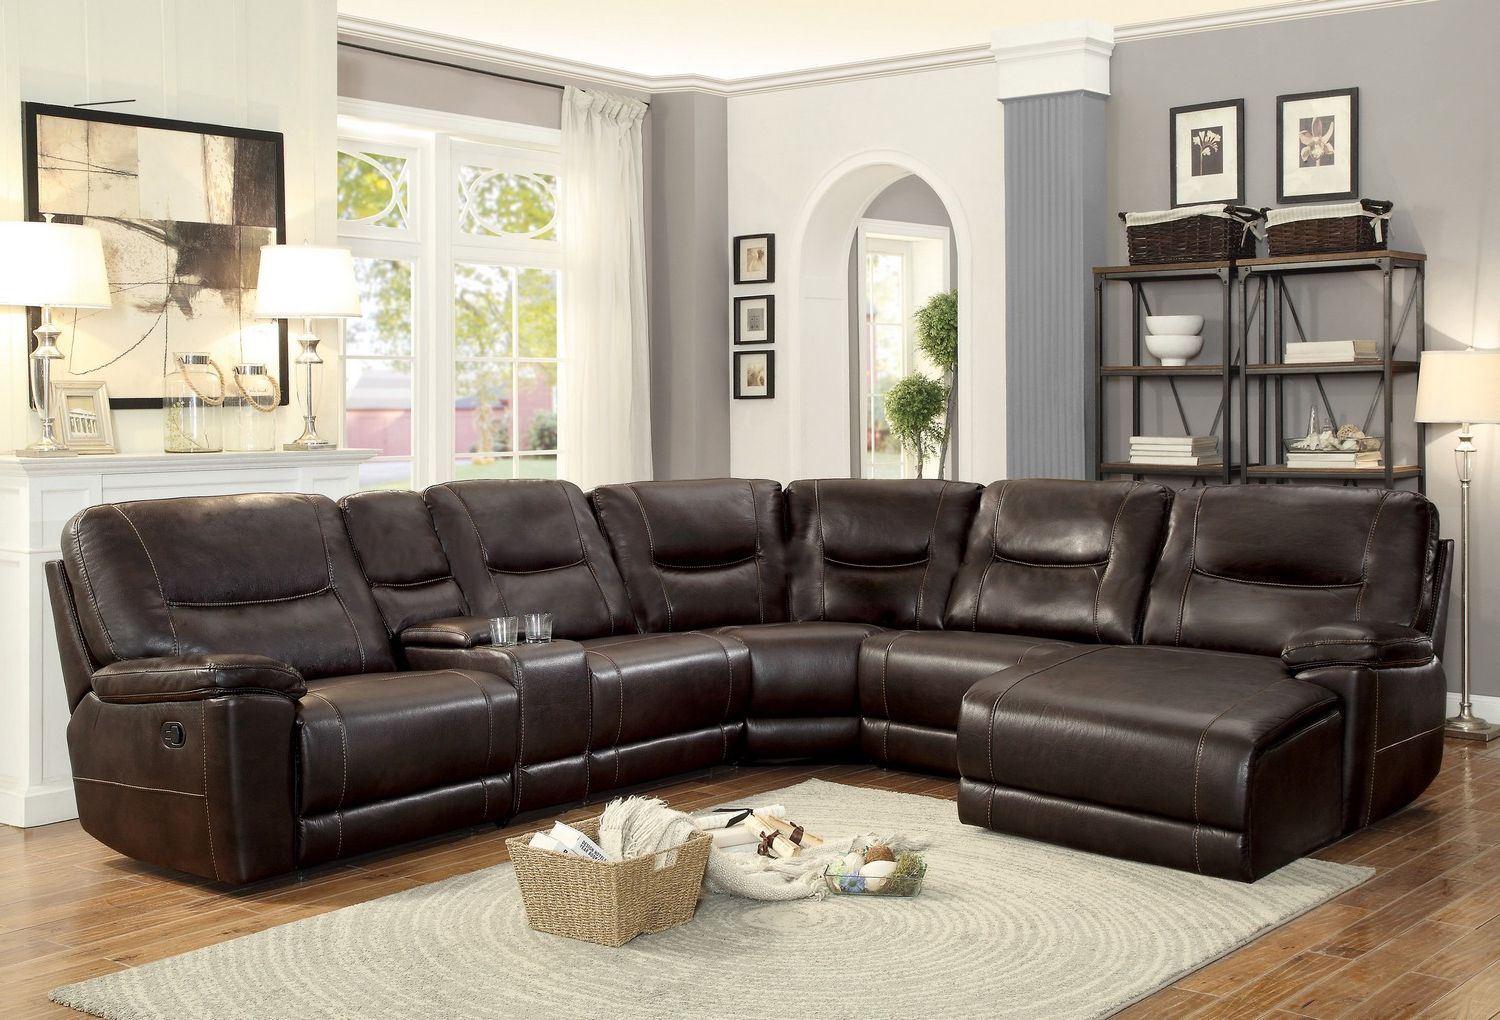 Homelegance Columbus Reclining Sectional Sofa Set B – Breathable Faux Throughout Faux Leather Sofas In Dark Brown (View 2 of 20)